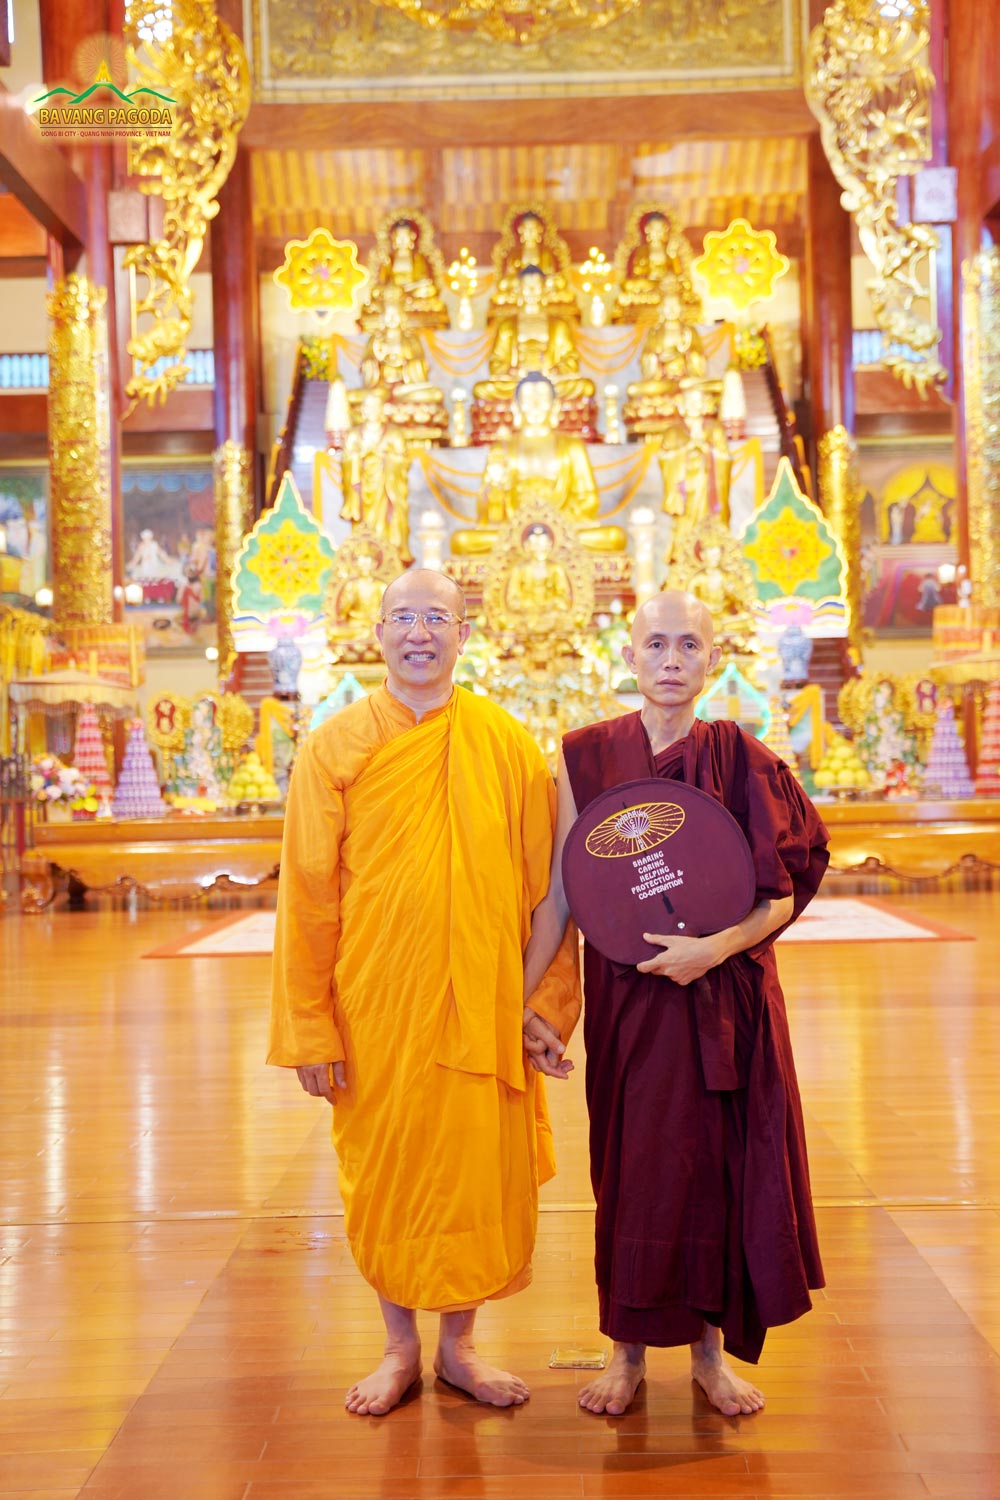 The hand-holding of Dharma friendship represented the harmony between monks like water and milk, as taught by the Buddha.